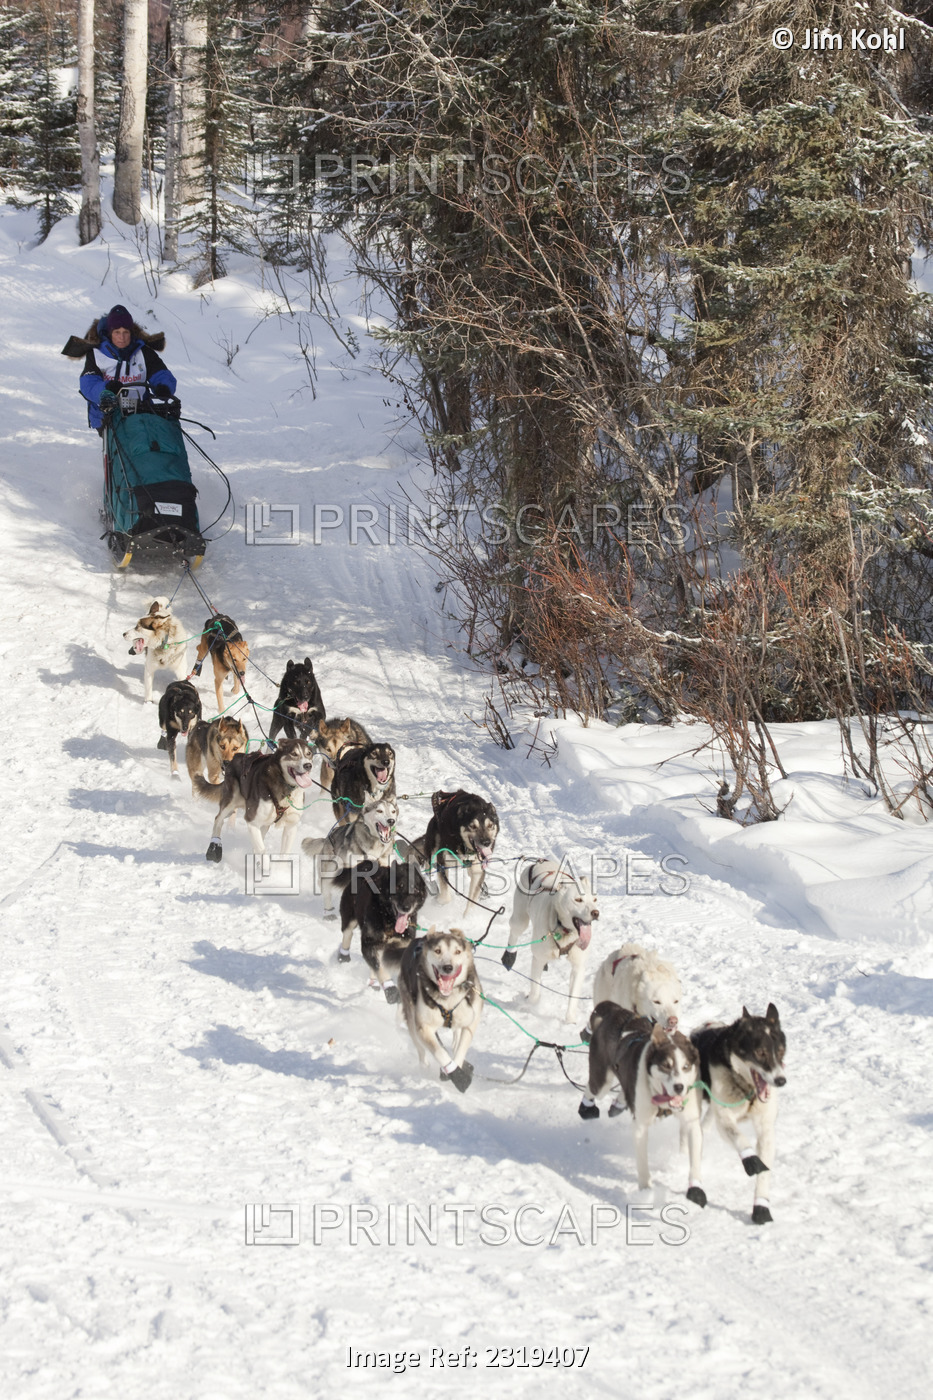 Cindy Gallea Mushing On To Long Lake At The 2010 Iditarod Re-Start, Willow, ...